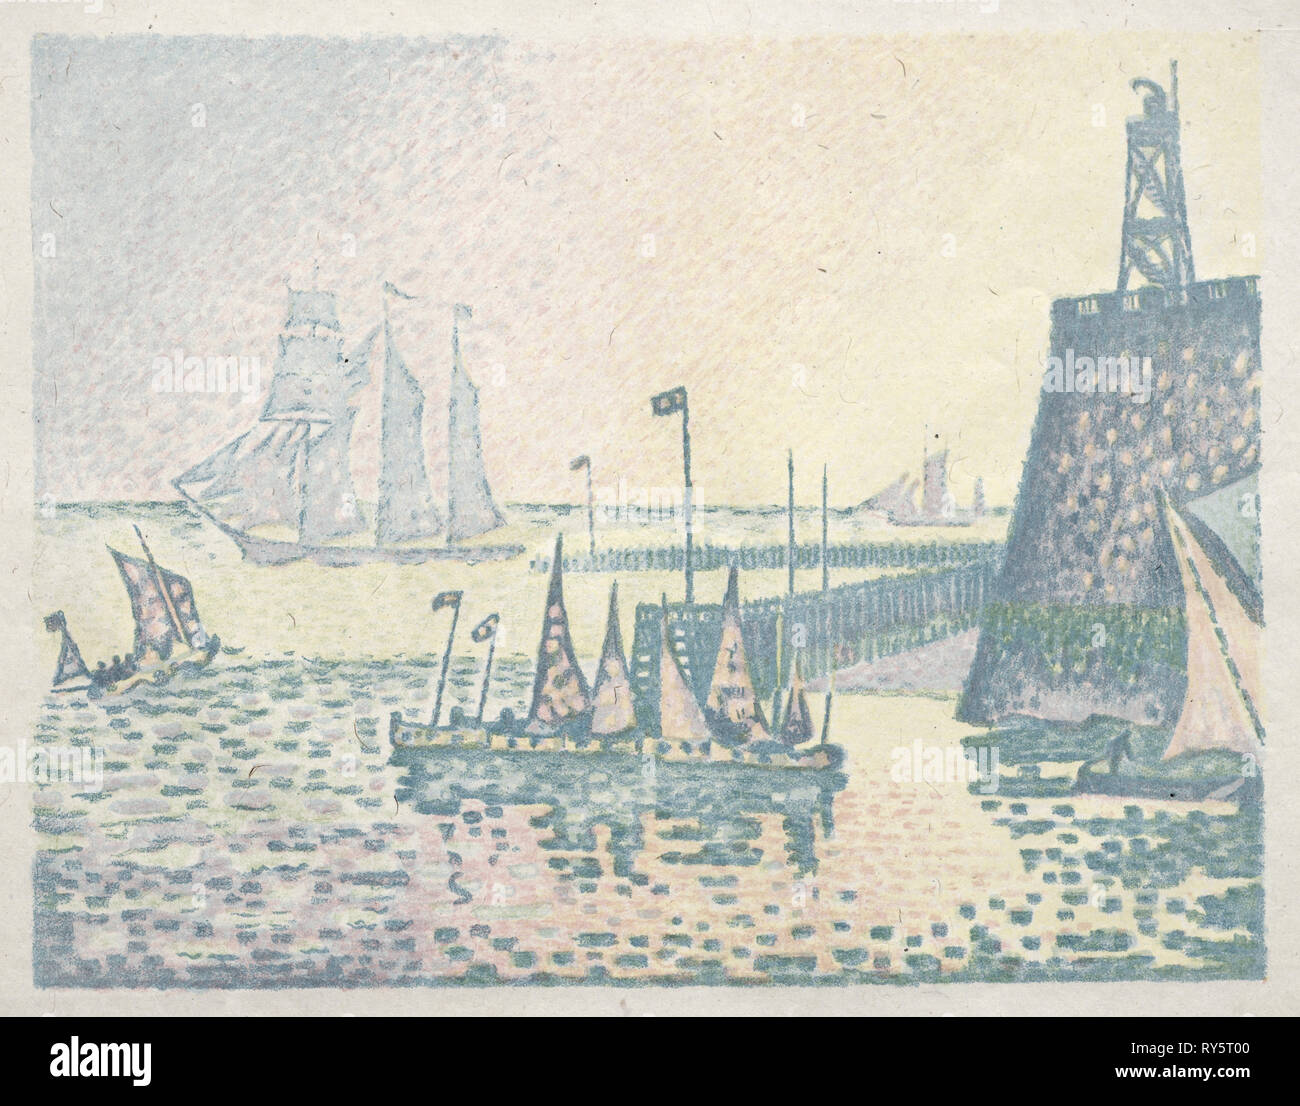 Evening, The Jetty at Vlissingen, 1898. Paul Signac (French, 1863-1935). Lithograph Stock Photo